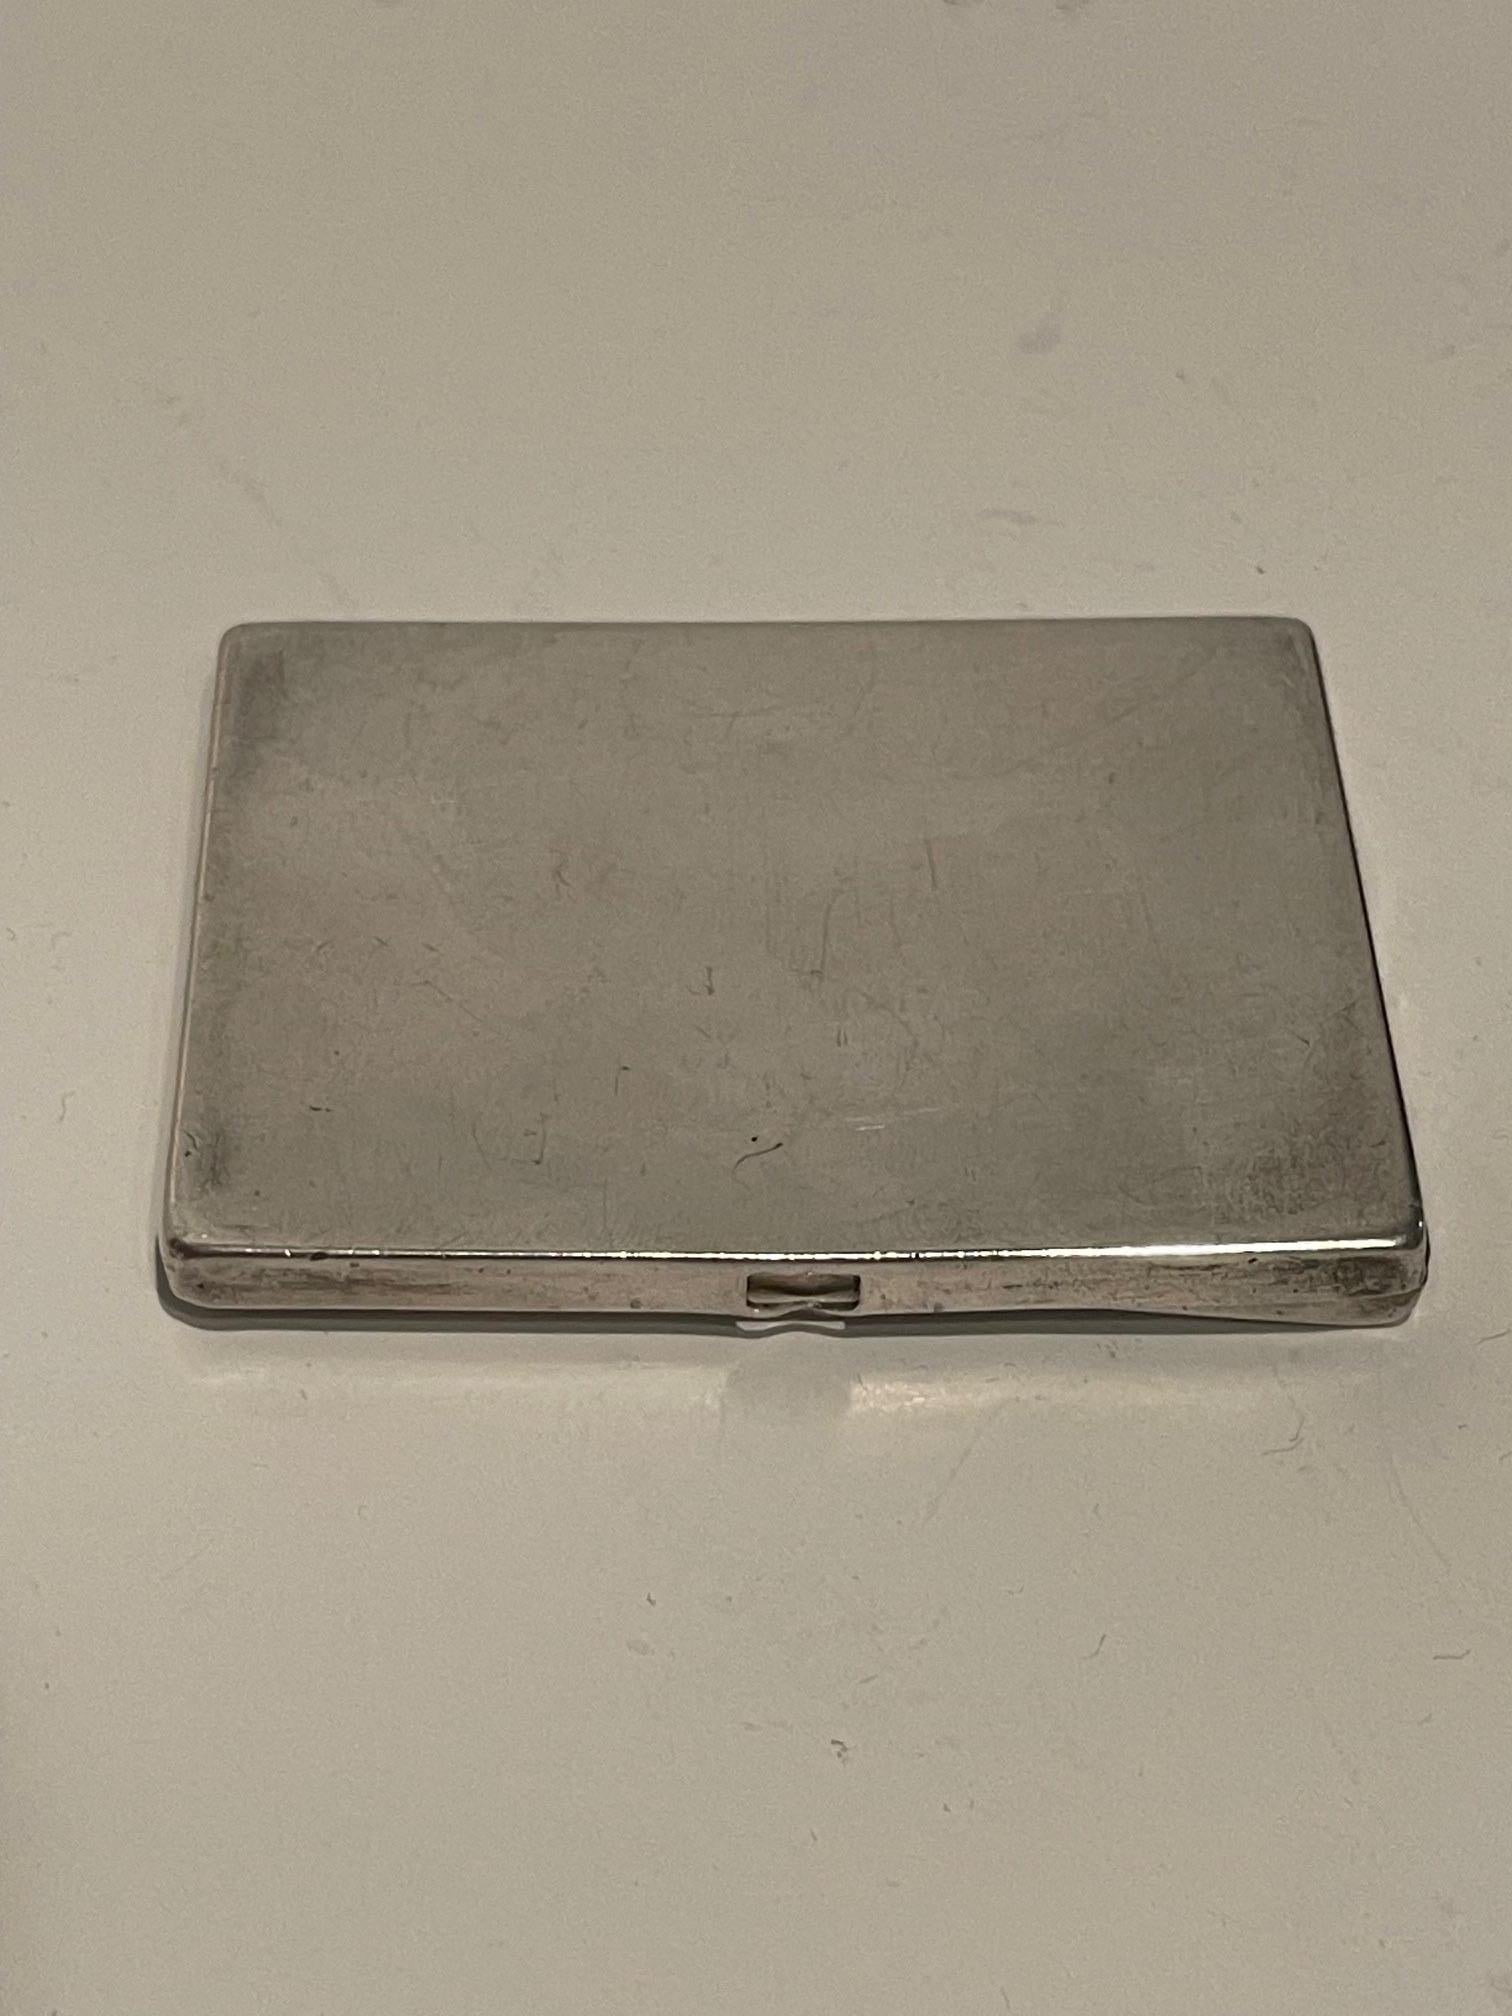 Silver Business Card Holder.  More of a decorative piece now as it is smaller than a regular business card